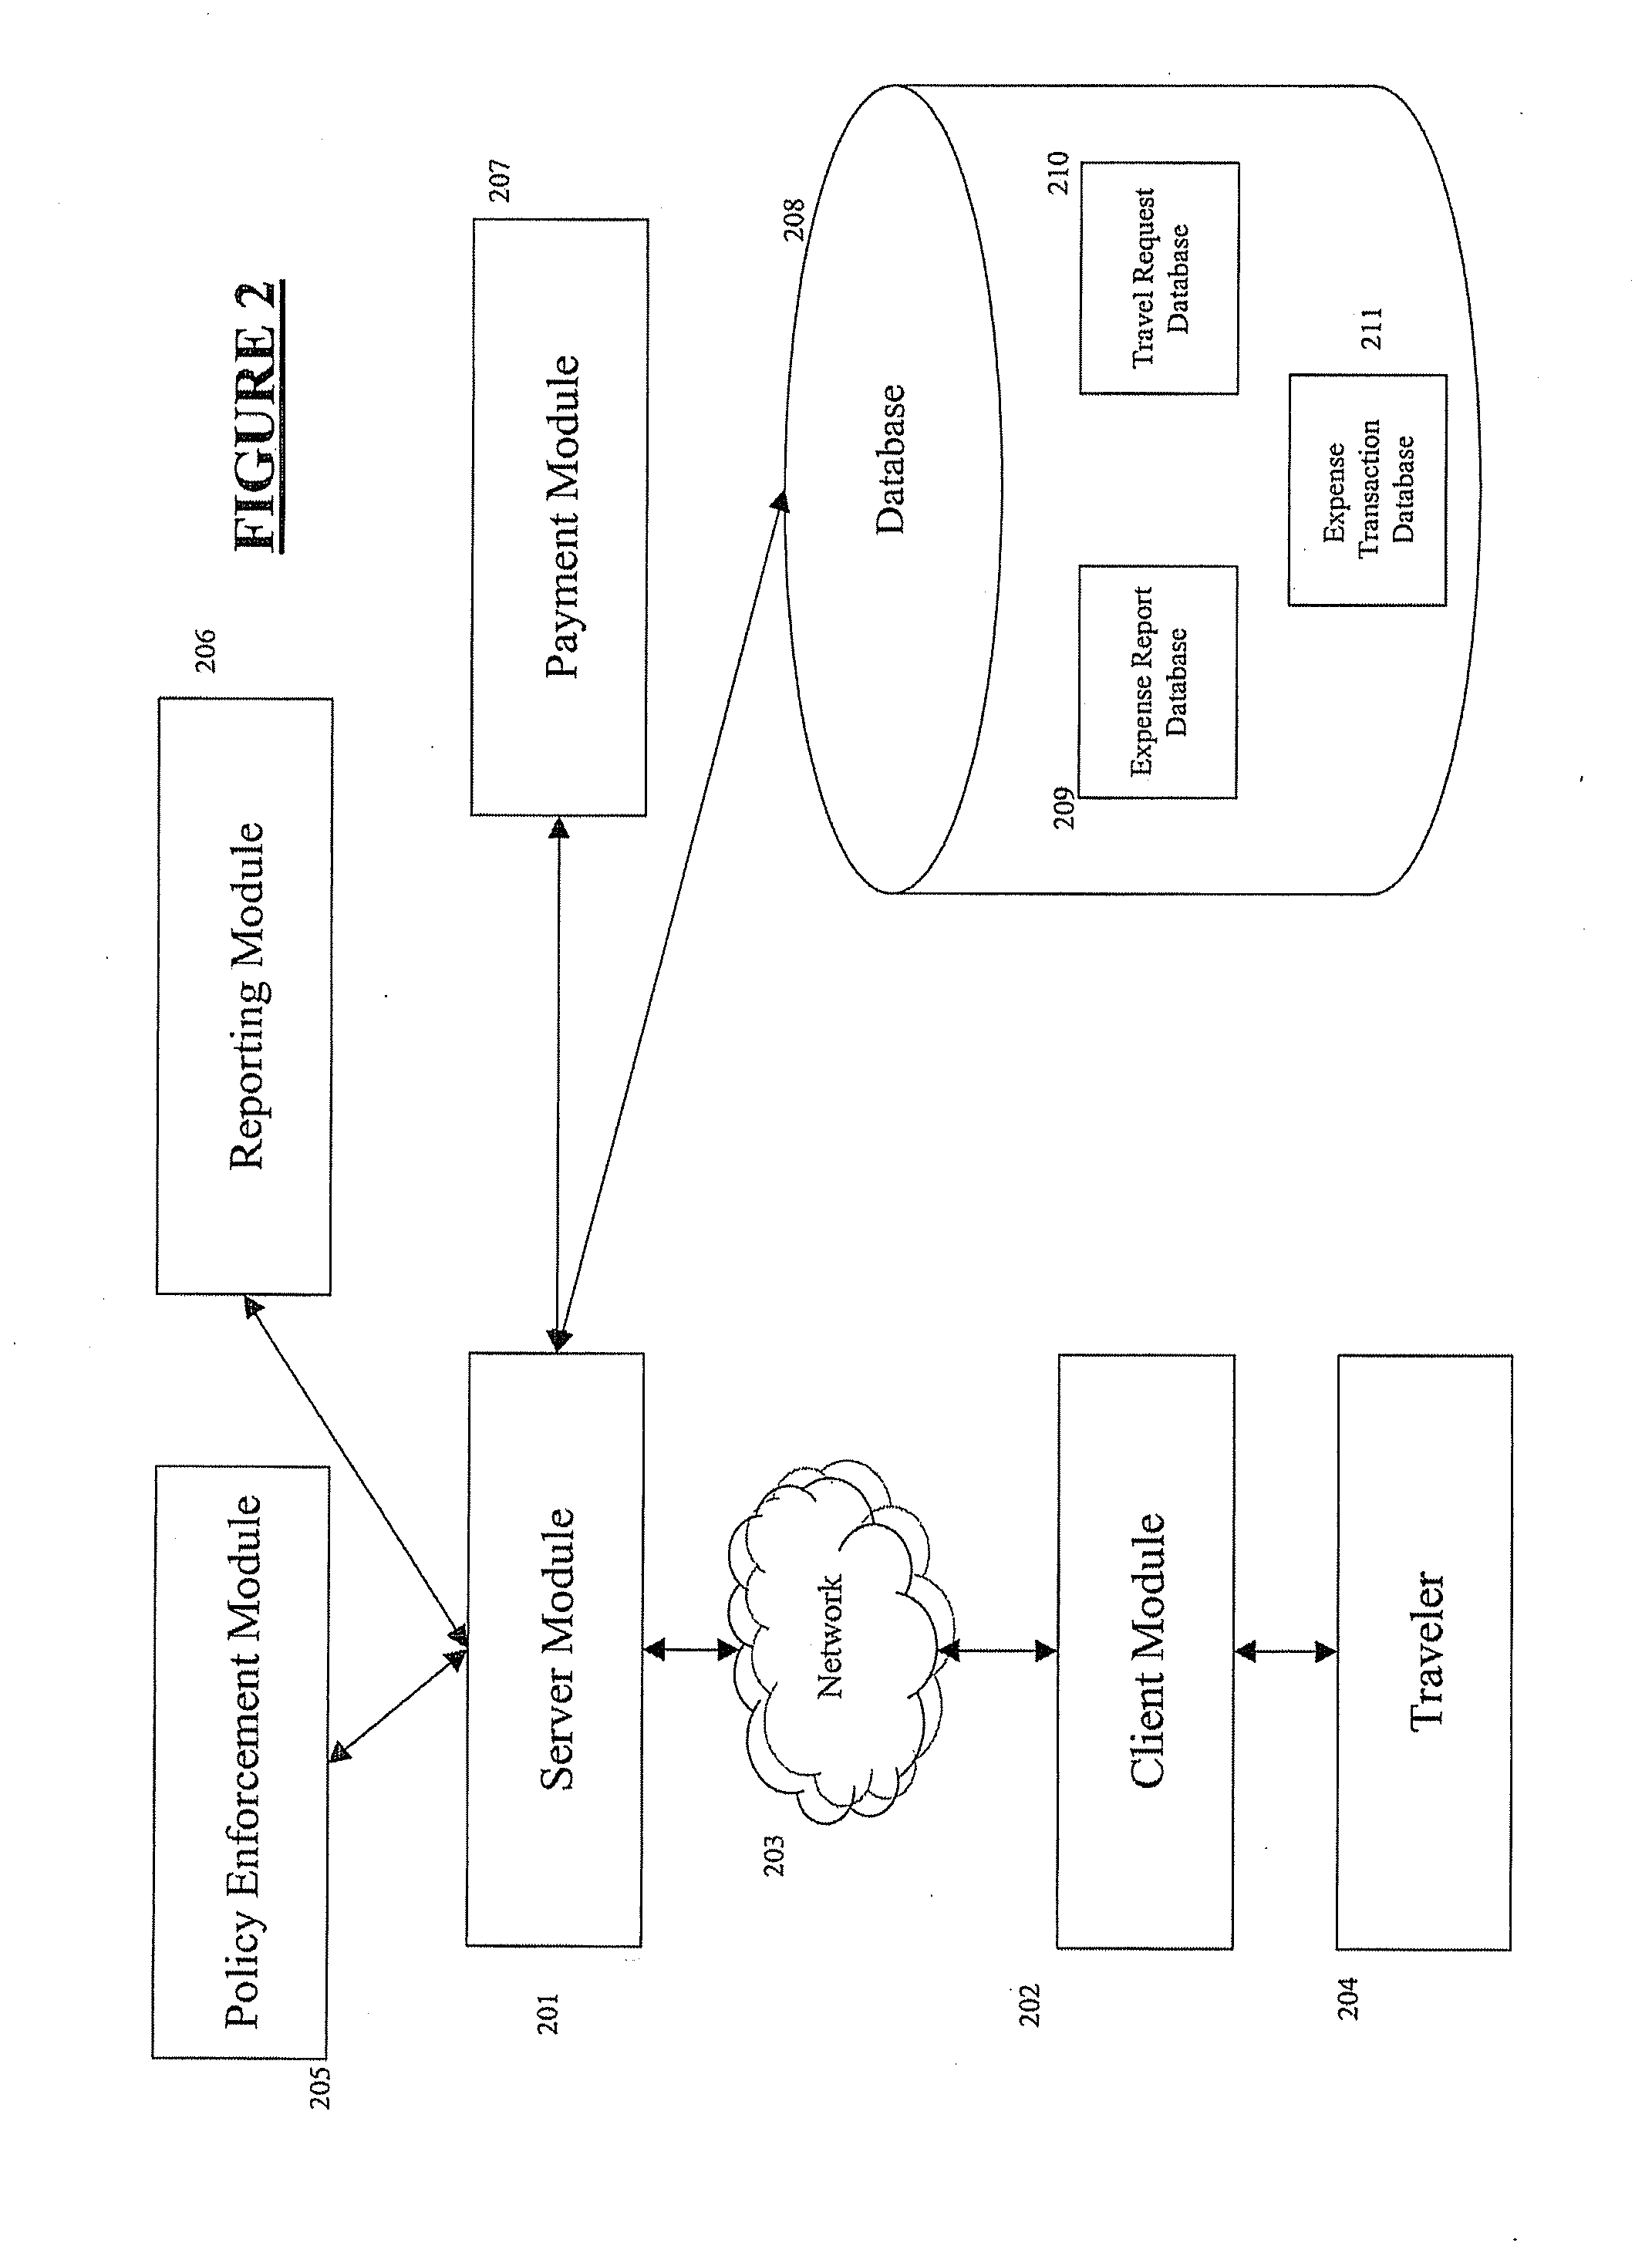 System and method for integrated travel and expense mangement and detecting duplicate travel path information